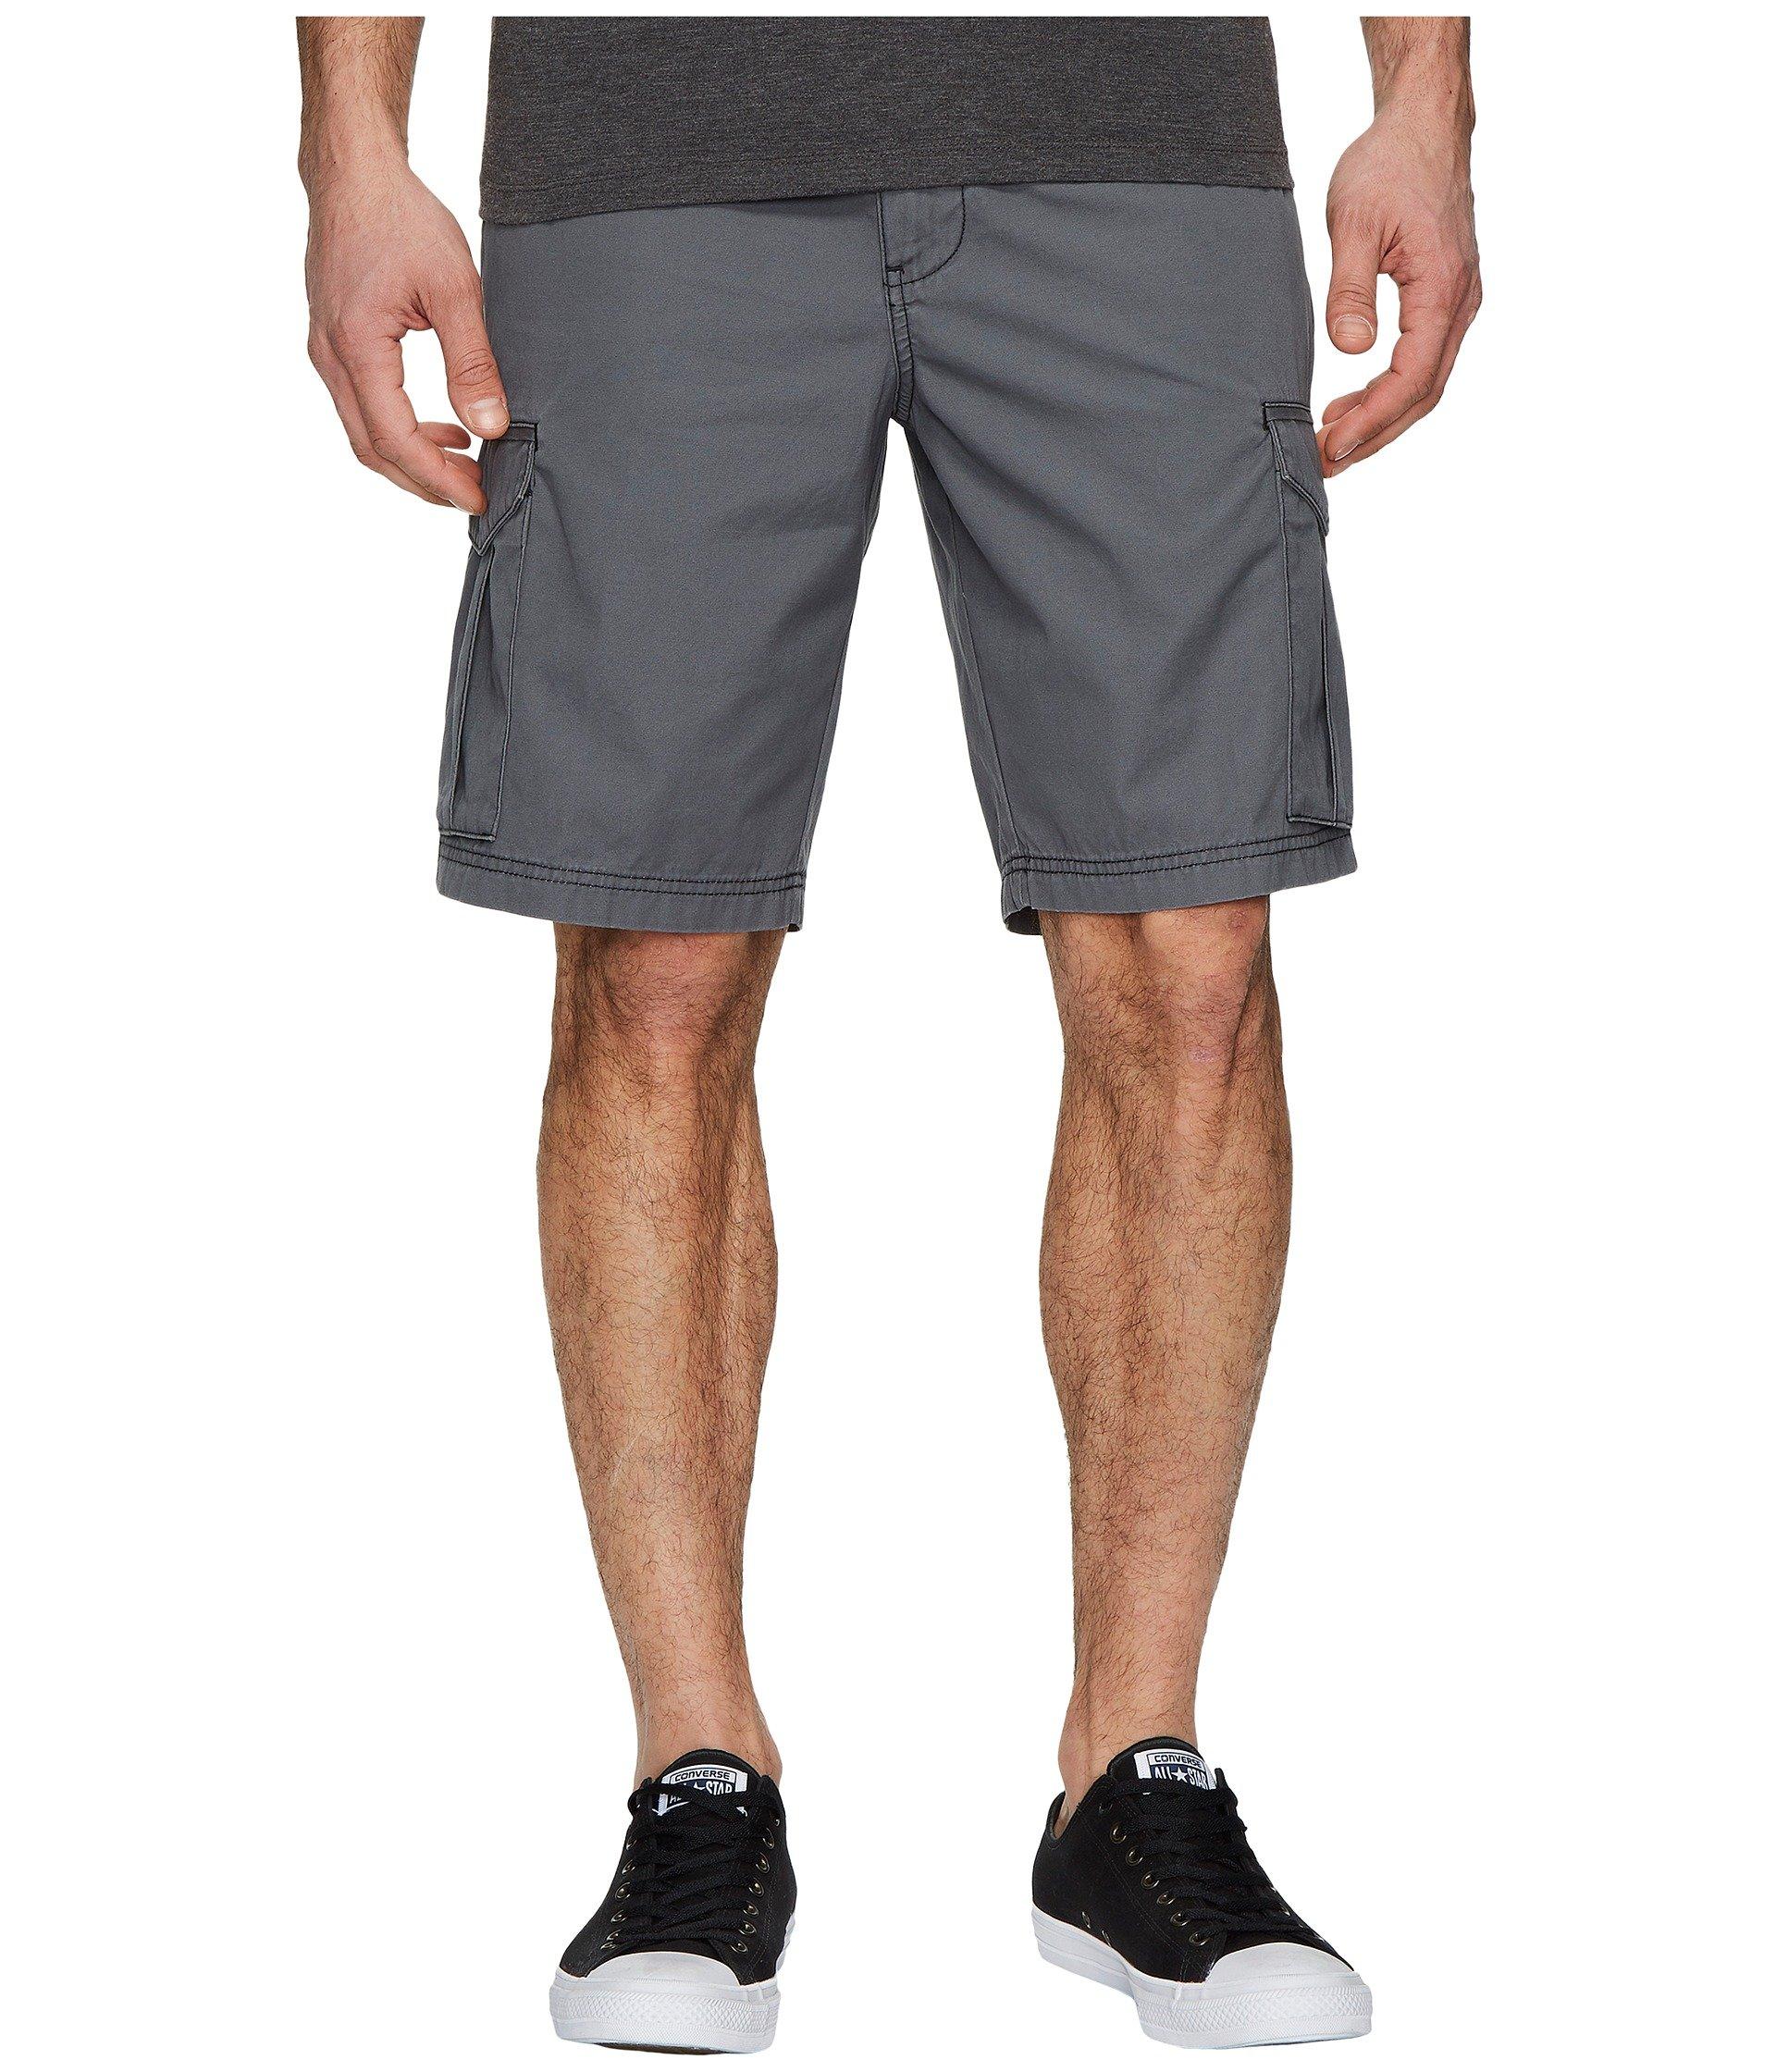 Tommy Bahama Cotton Island Survivalist Cargo Shorts in Gray for Men - Lyst